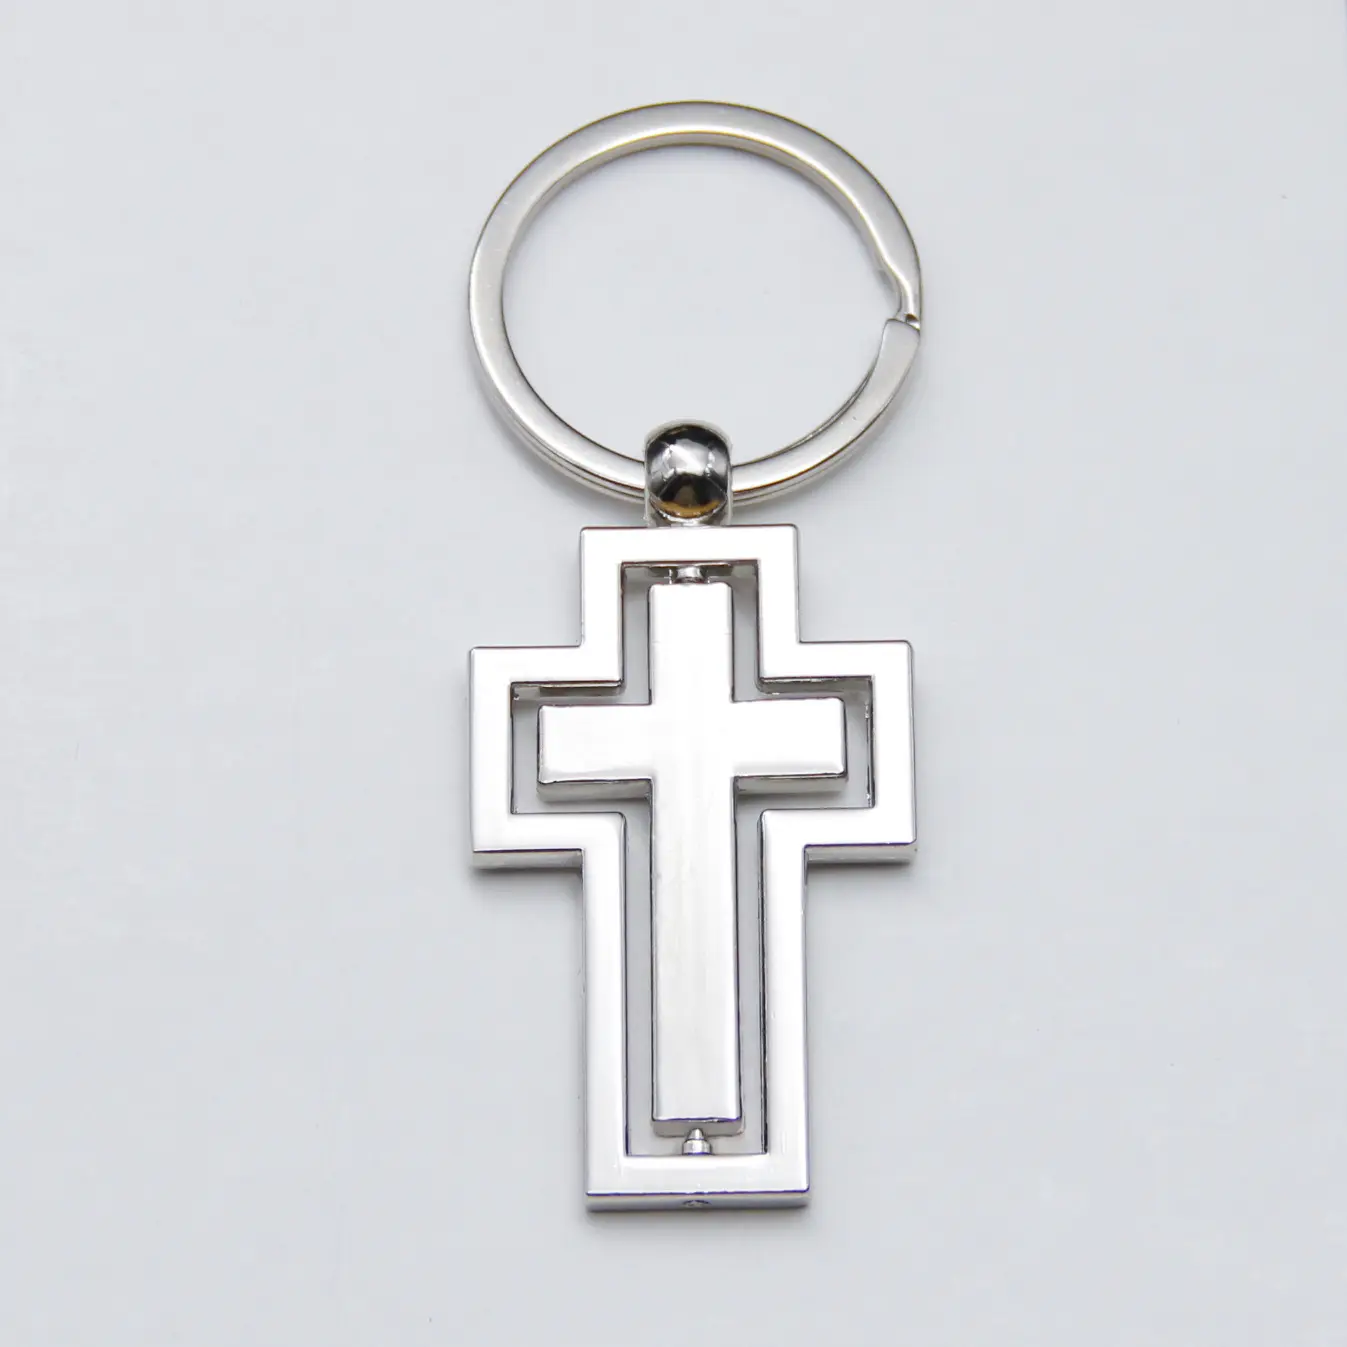 Customize Faith Based Keychains Double-sided Rotary Cross Metal Key Chain Men Key Ring